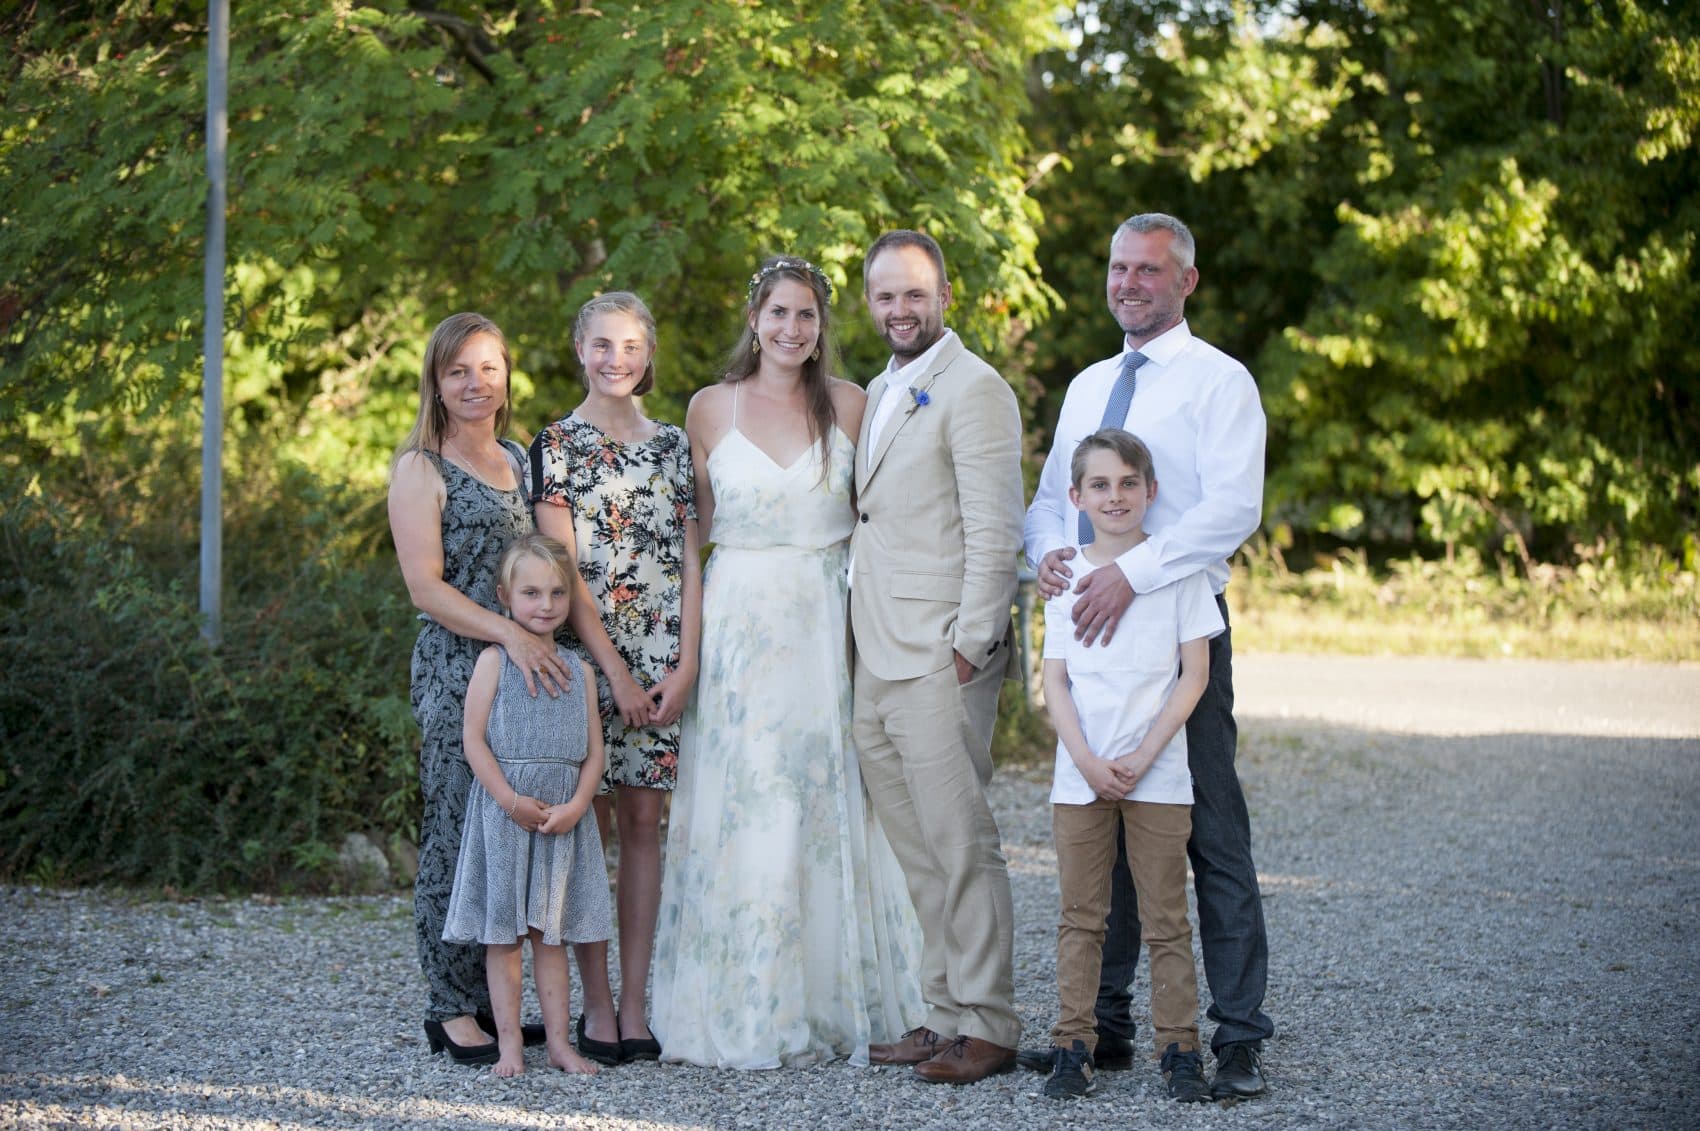 Sine Christiansen's family with Rachael and her husband on their wedding day (Photo by Tracie Van Auken)